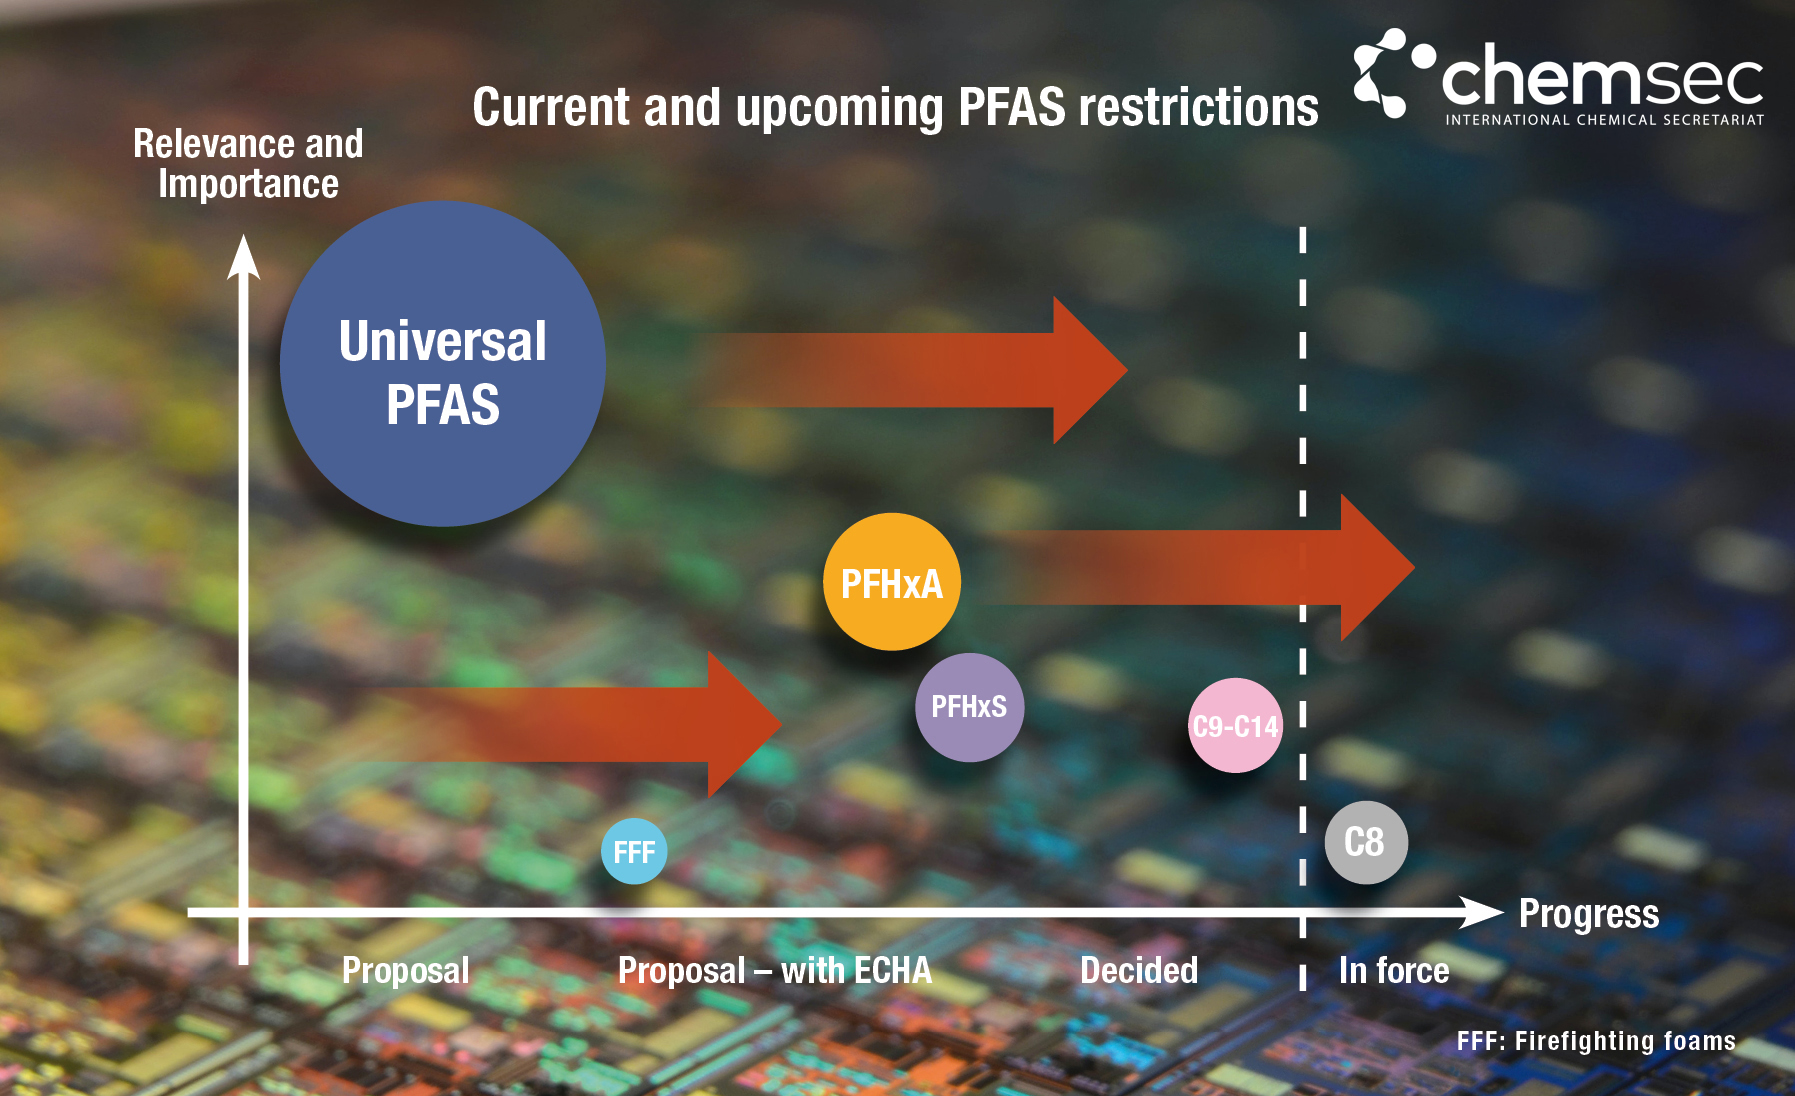 Current and upcoming PFAS restrictions